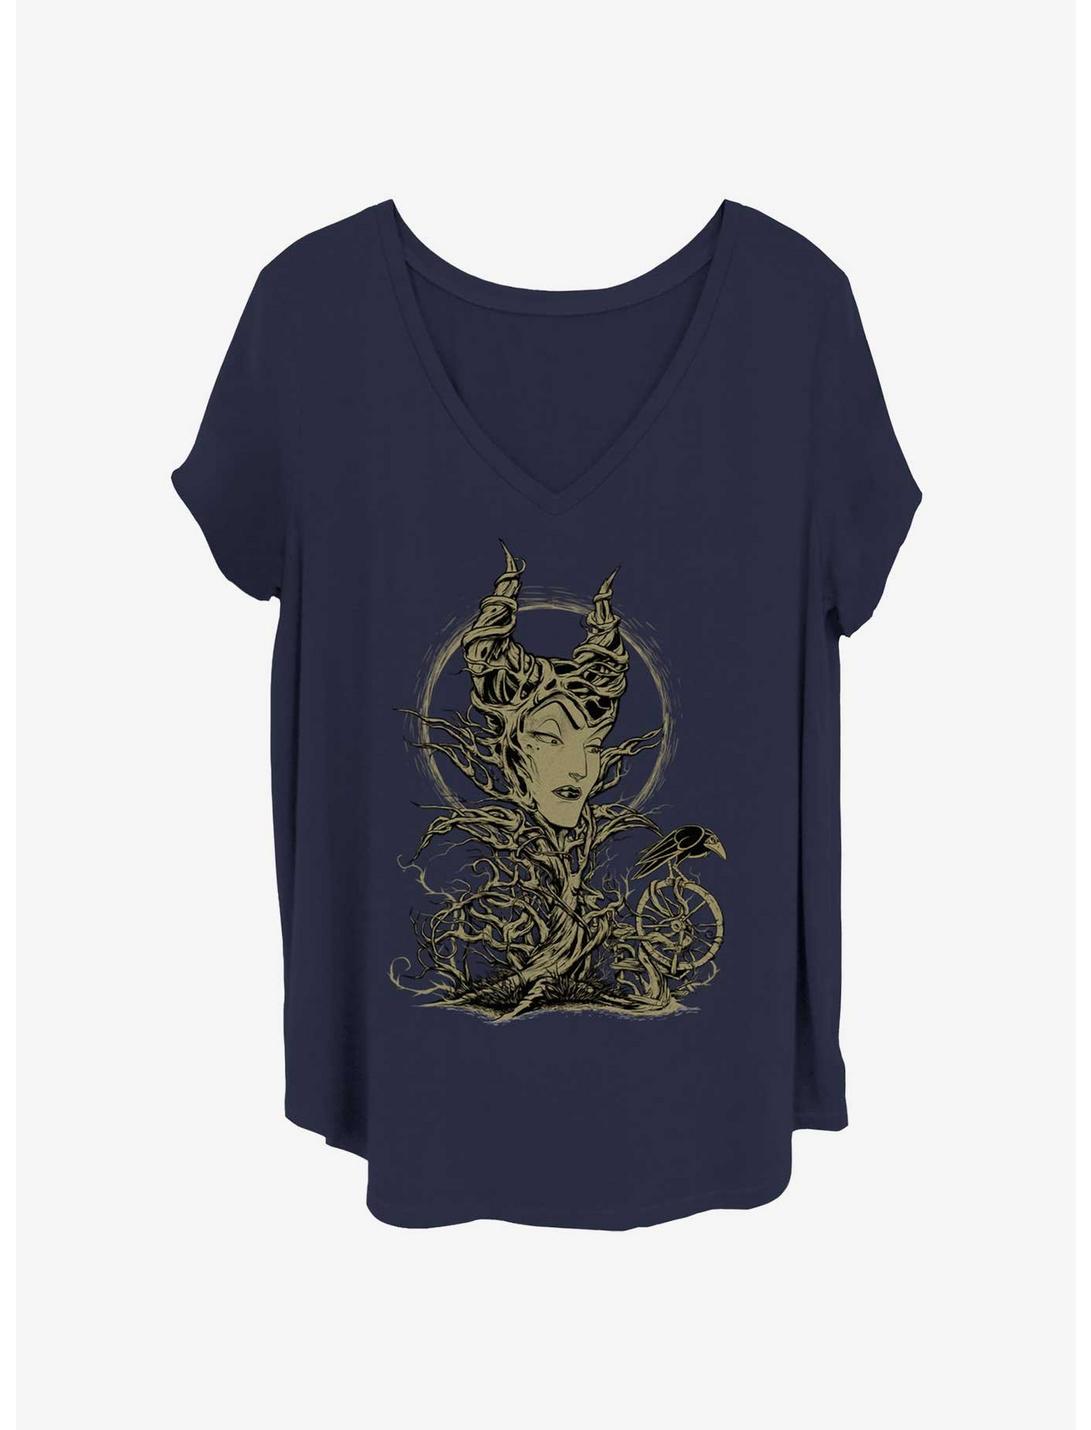 Disney Maleficent The Gift Giver Womens T-Shirt Plus Size, NAVY, hi-res